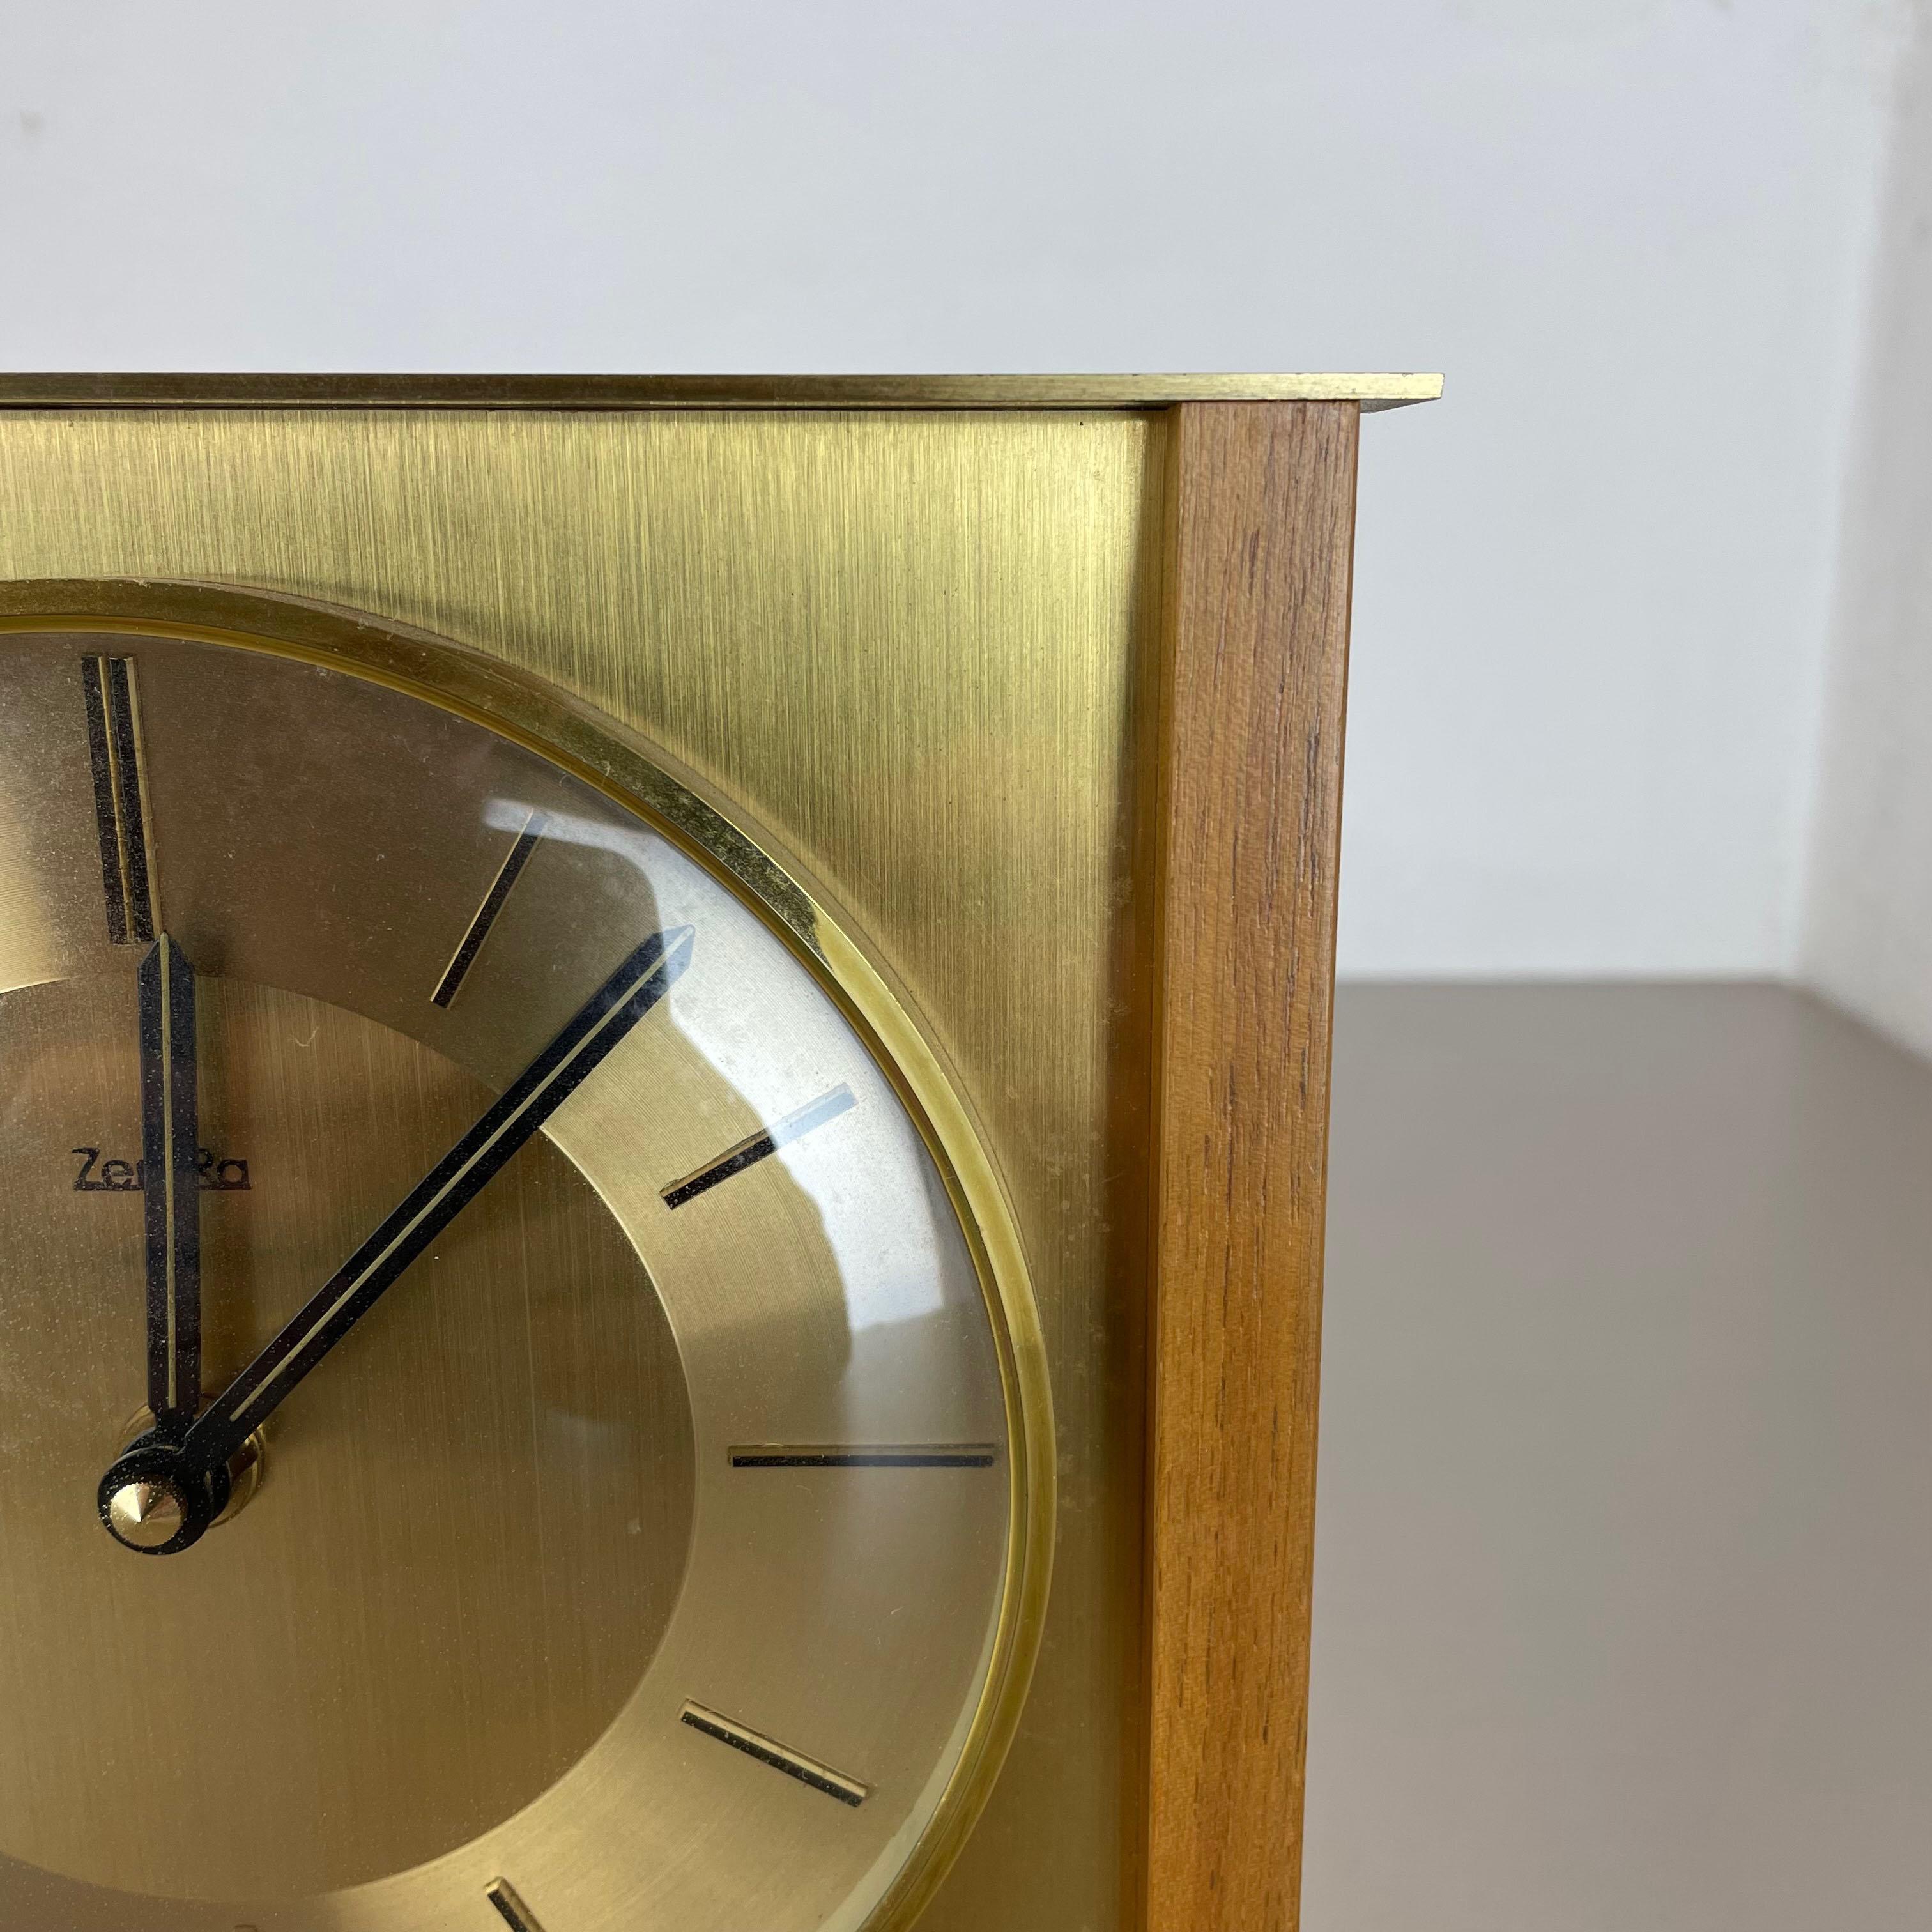 20th Century Vintage Modernist Wooden Teak Brass wall + Table Clock by Zentra, Germany For Sale